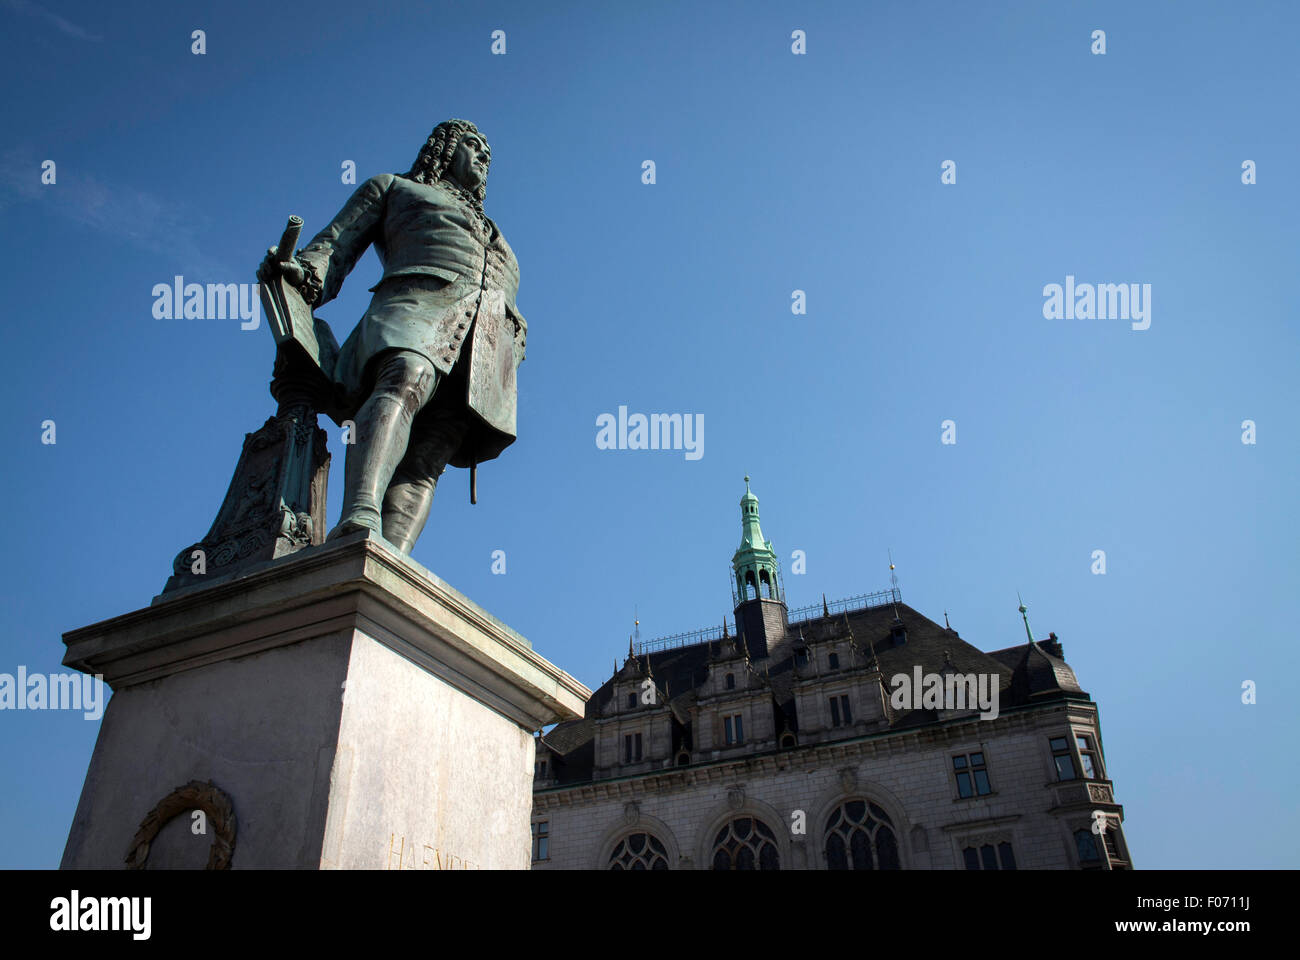 Halle, Germany is the birthplace of composer Georg Friedrich Händel. A statue is erected in the city market place to his honor. Stock Photo